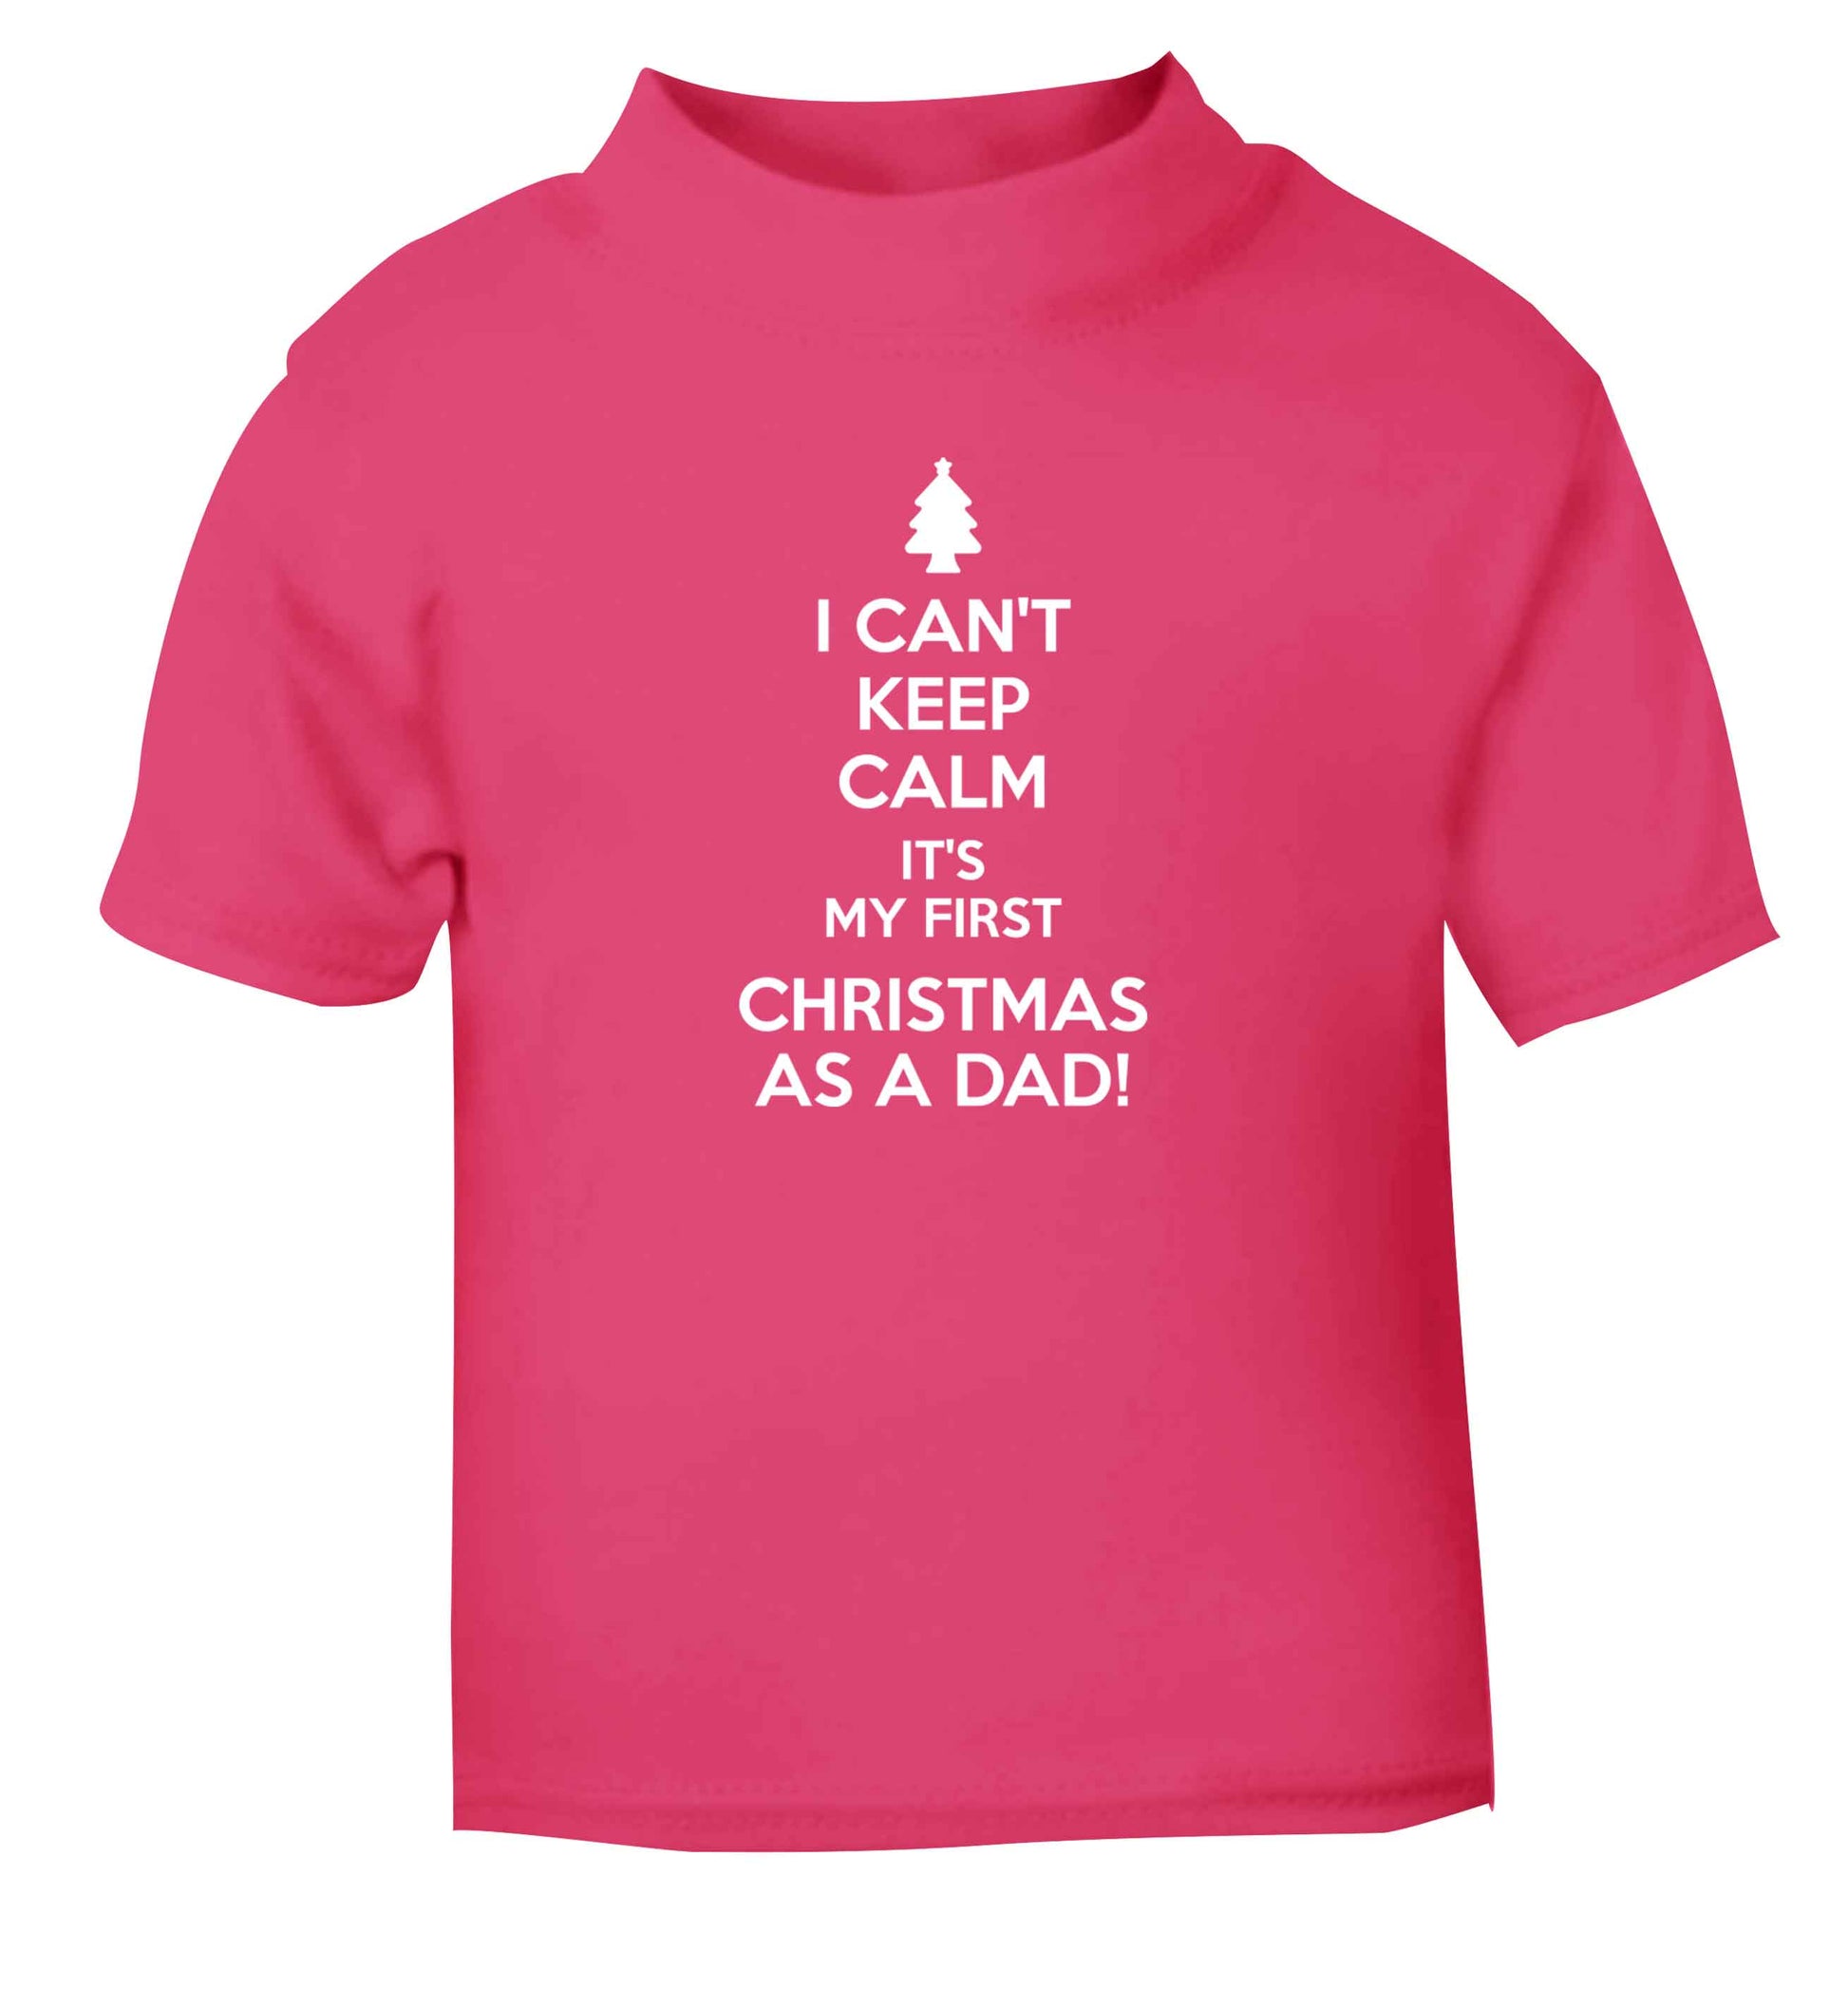 I can't keep calm it's my first Christmas as a dad pink Baby Toddler Tshirt 2 Years